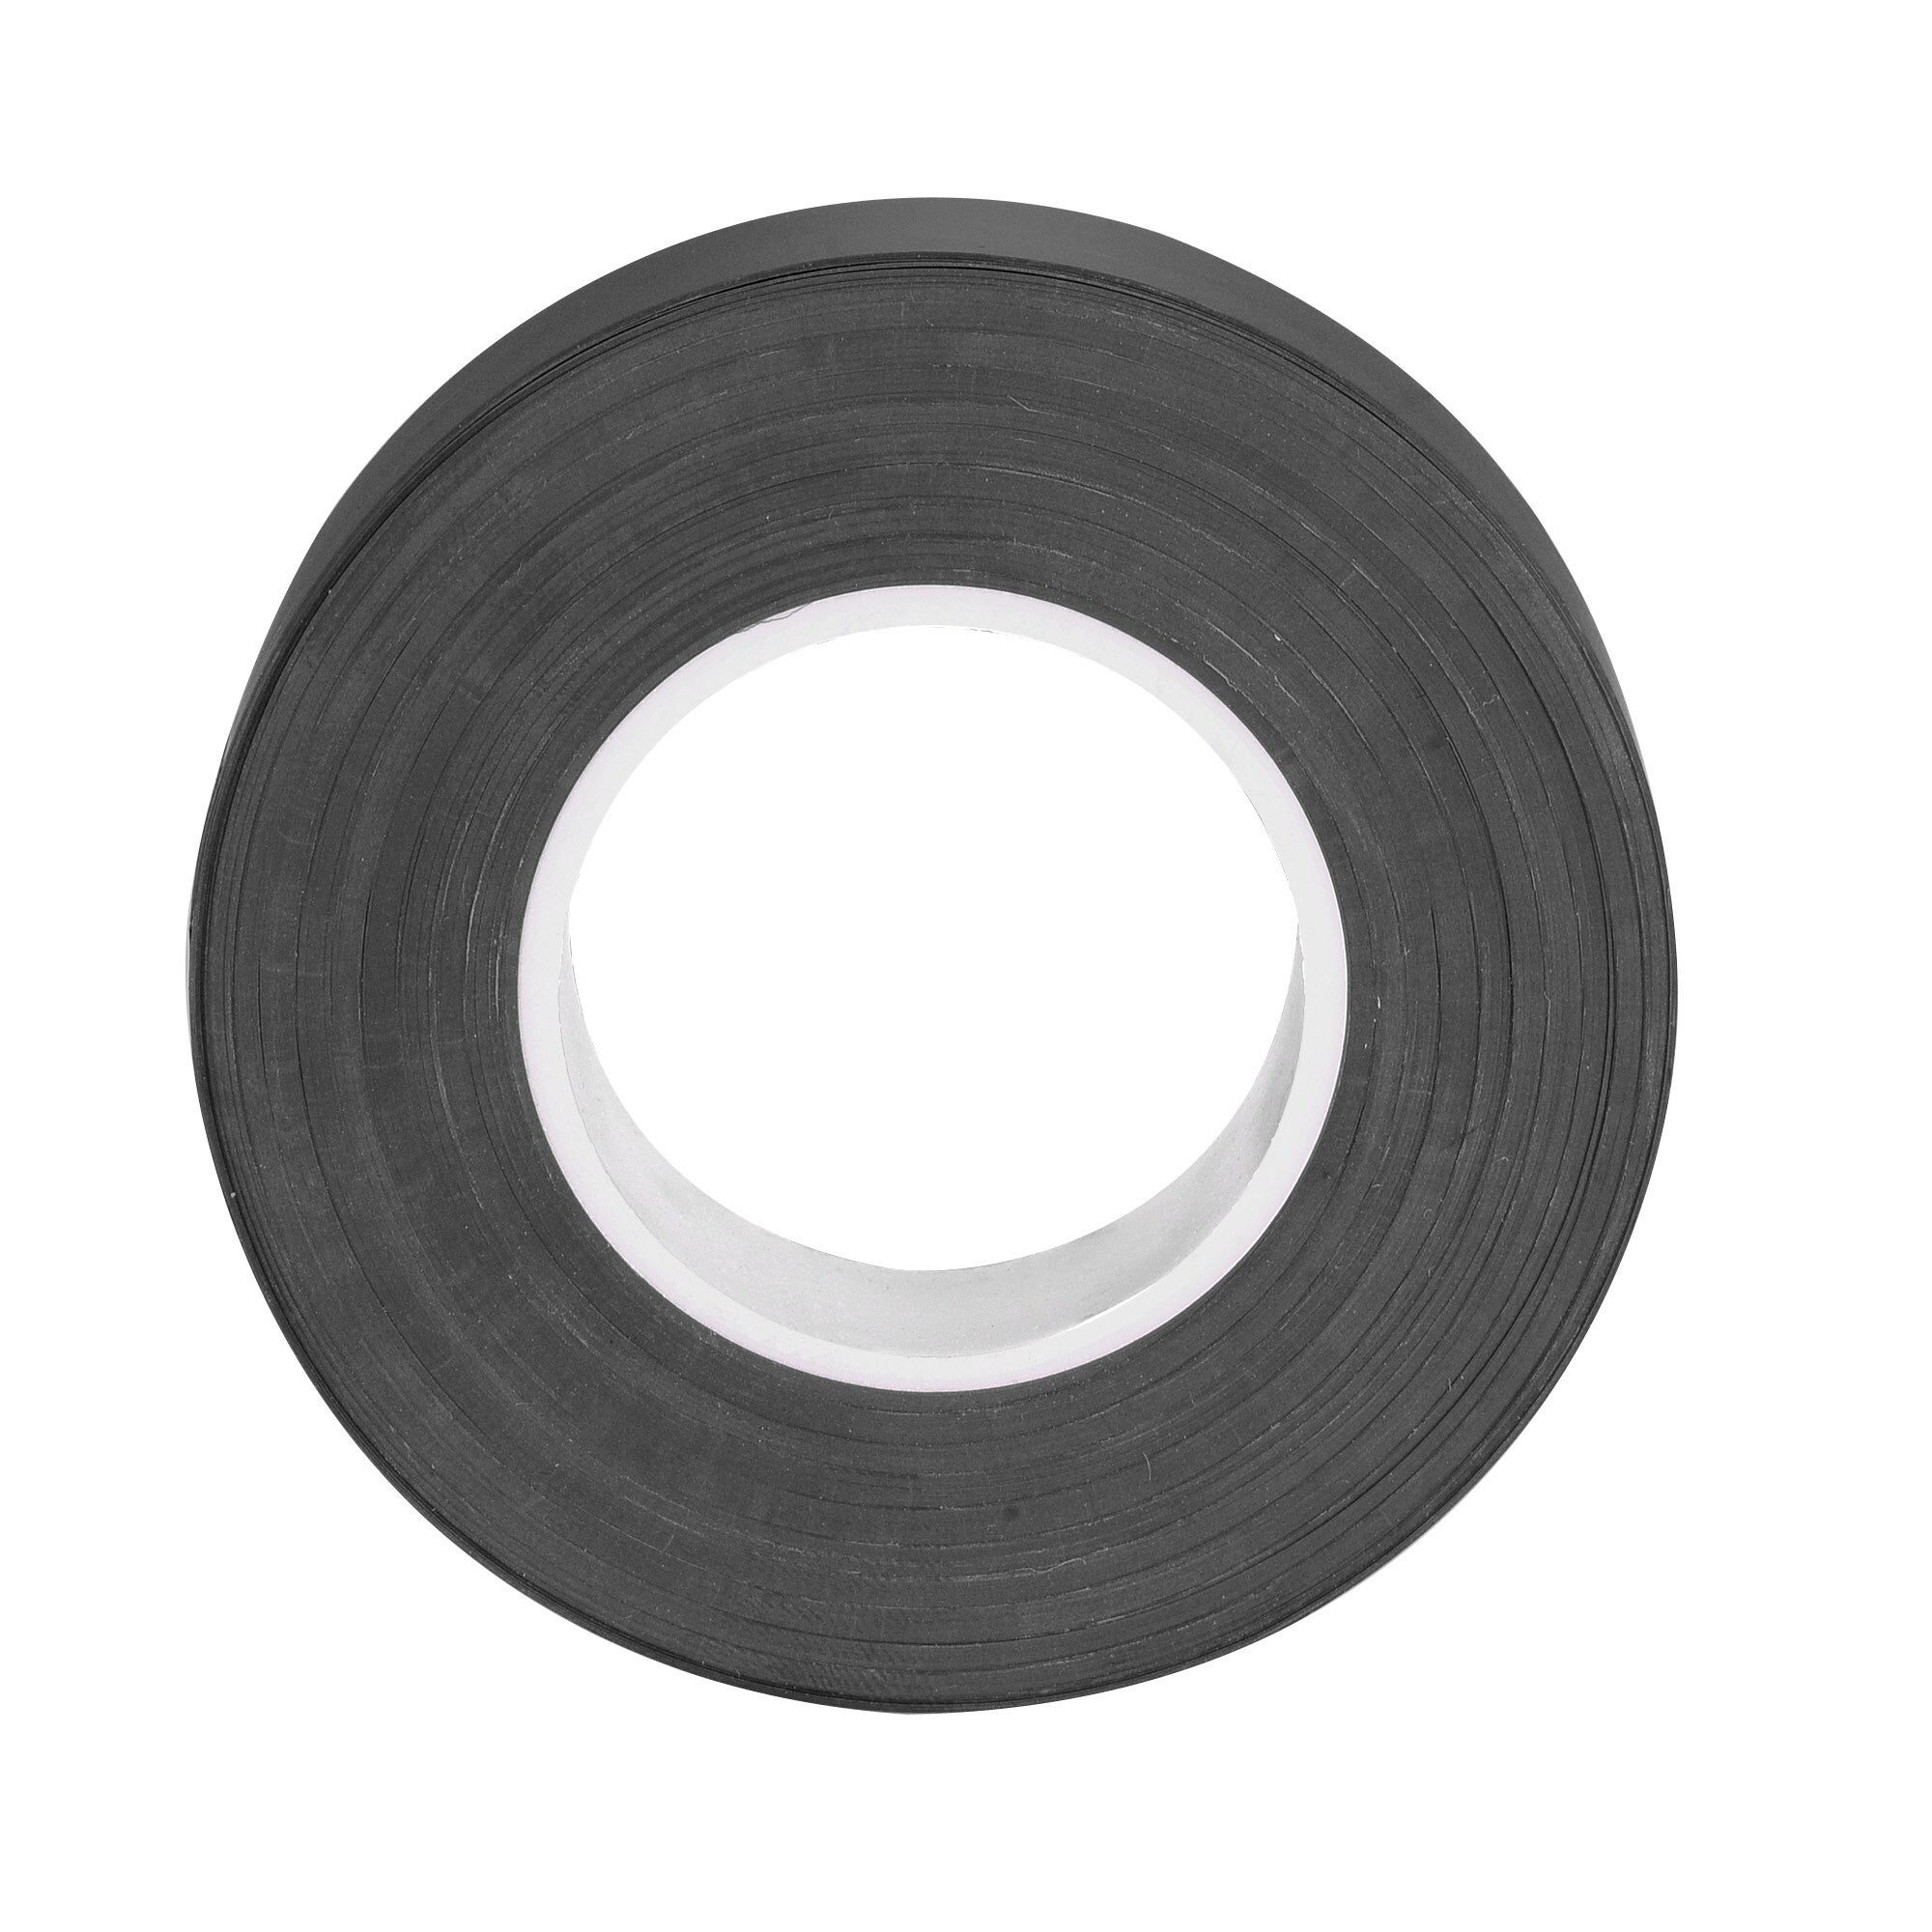 Double Sided Tape-2000x20x1mm Strong Adhesive Mounting Tape for Wall, 2Pcs  Tape - Transparent - 2000mm x 20mm x 1mm